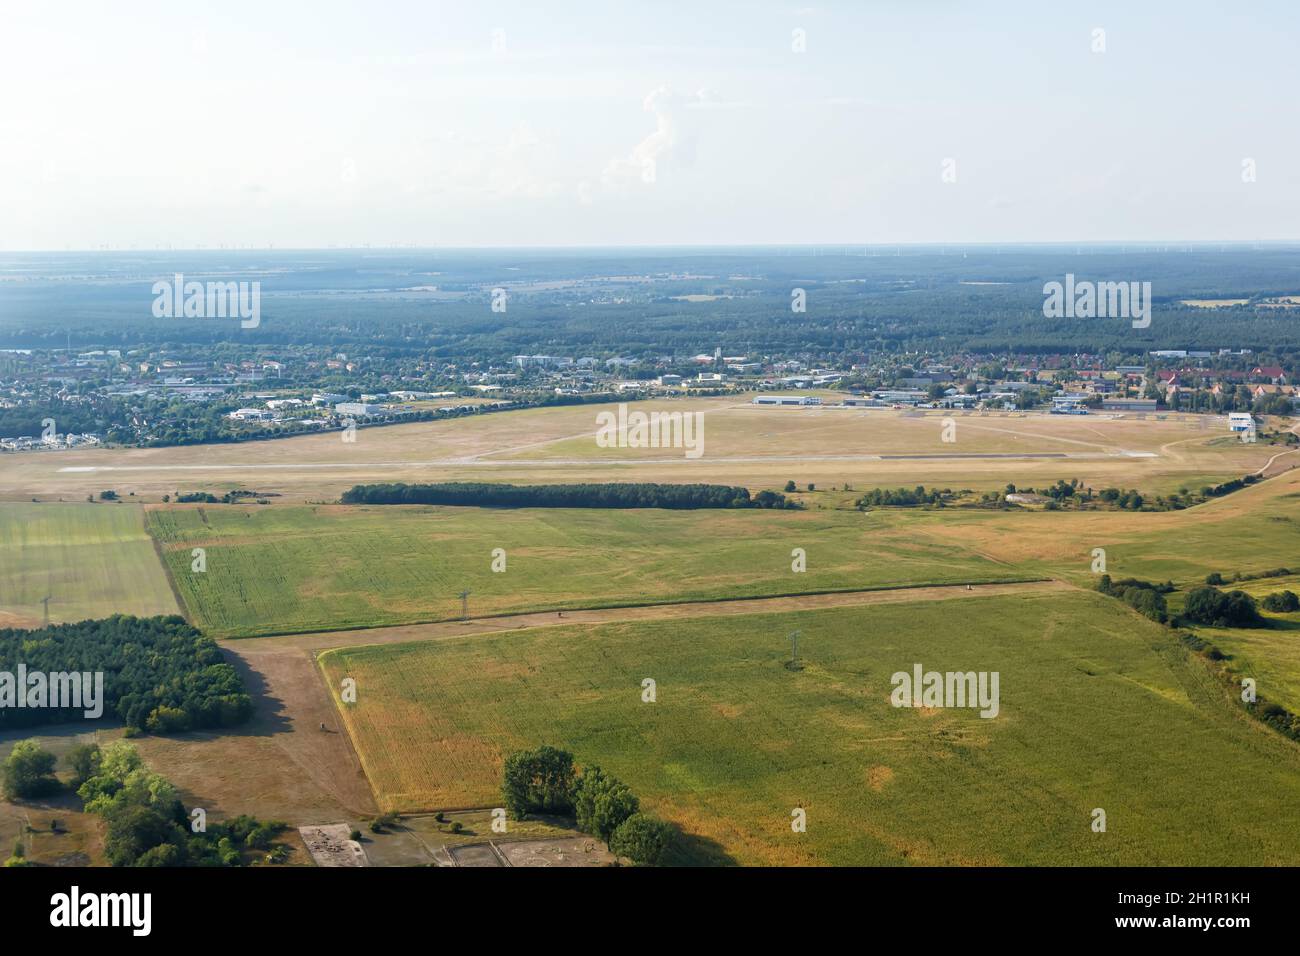 Strausberg, Germany - August 19, 2020: Overview Strausberg Airport aerial view in Germany. Stock Photo